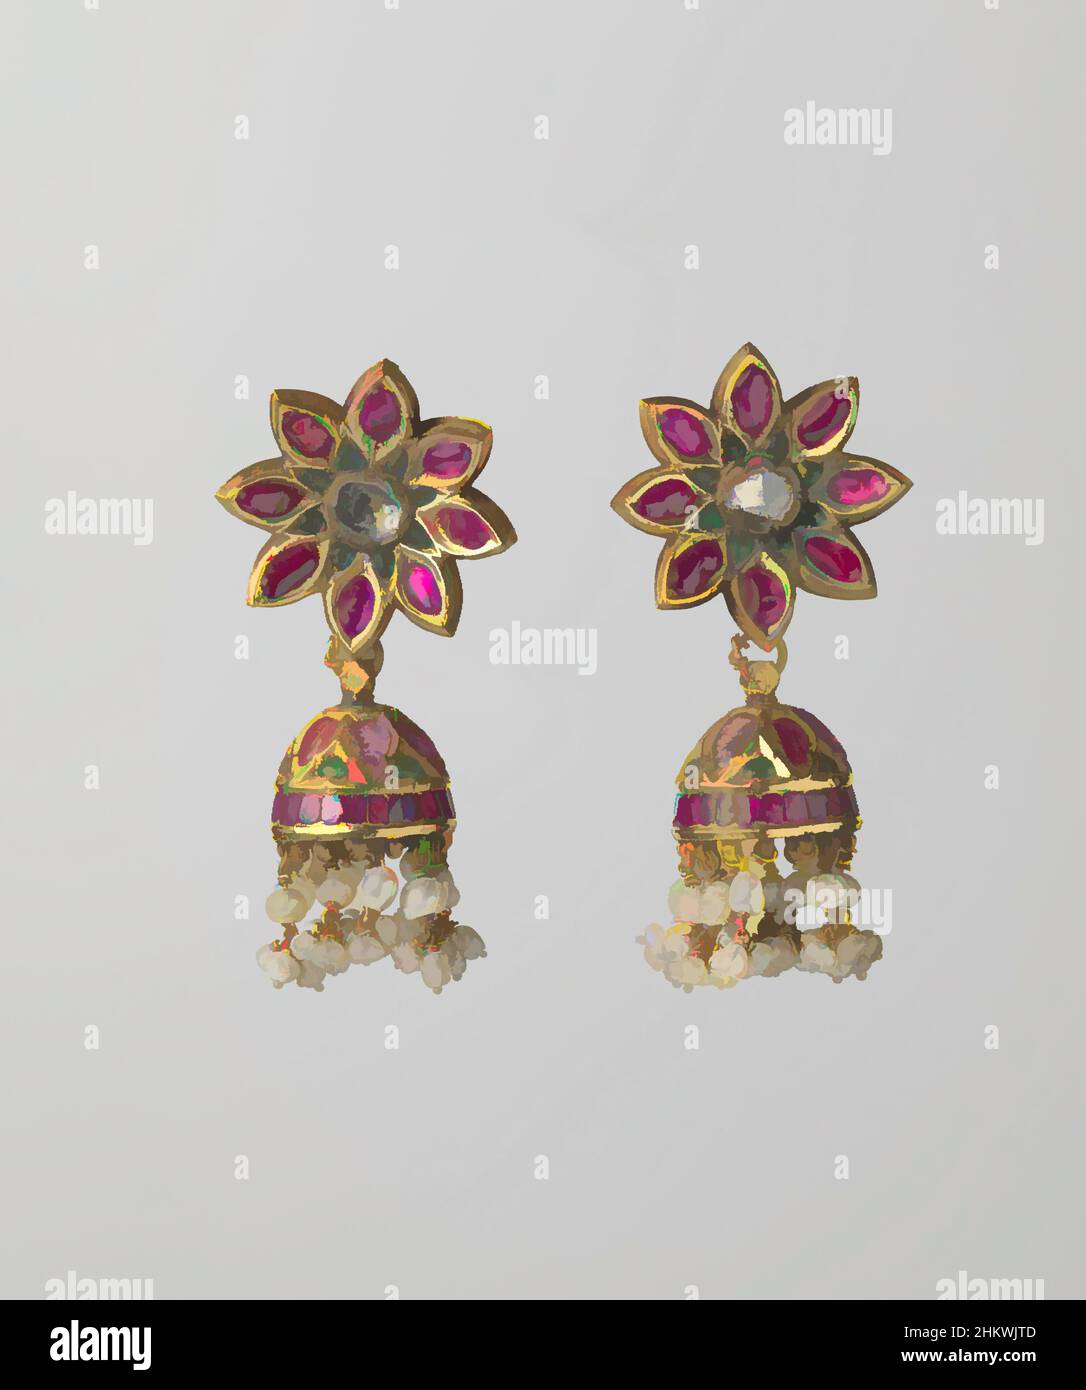 Art inspired by Pair of Earrings and Two Hair Ornaments, Pair of earrings (phuljhumka), A pair of earrings (phuljhumka) made of gold. Inlaid with red and green stones and diamond splinters. In the form of an eight-leaf lotus flower, from which hangs a bell-shaped gold bell, executed in, Classic works modernized by Artotop with a splash of modernity. Shapes, color and value, eye-catching visual impact on art. Emotions through freedom of artworks in a contemporary way. A timeless message pursuing a wildly creative new direction. Artists turning to the digital medium and creating the Artotop NFT Stock Photo